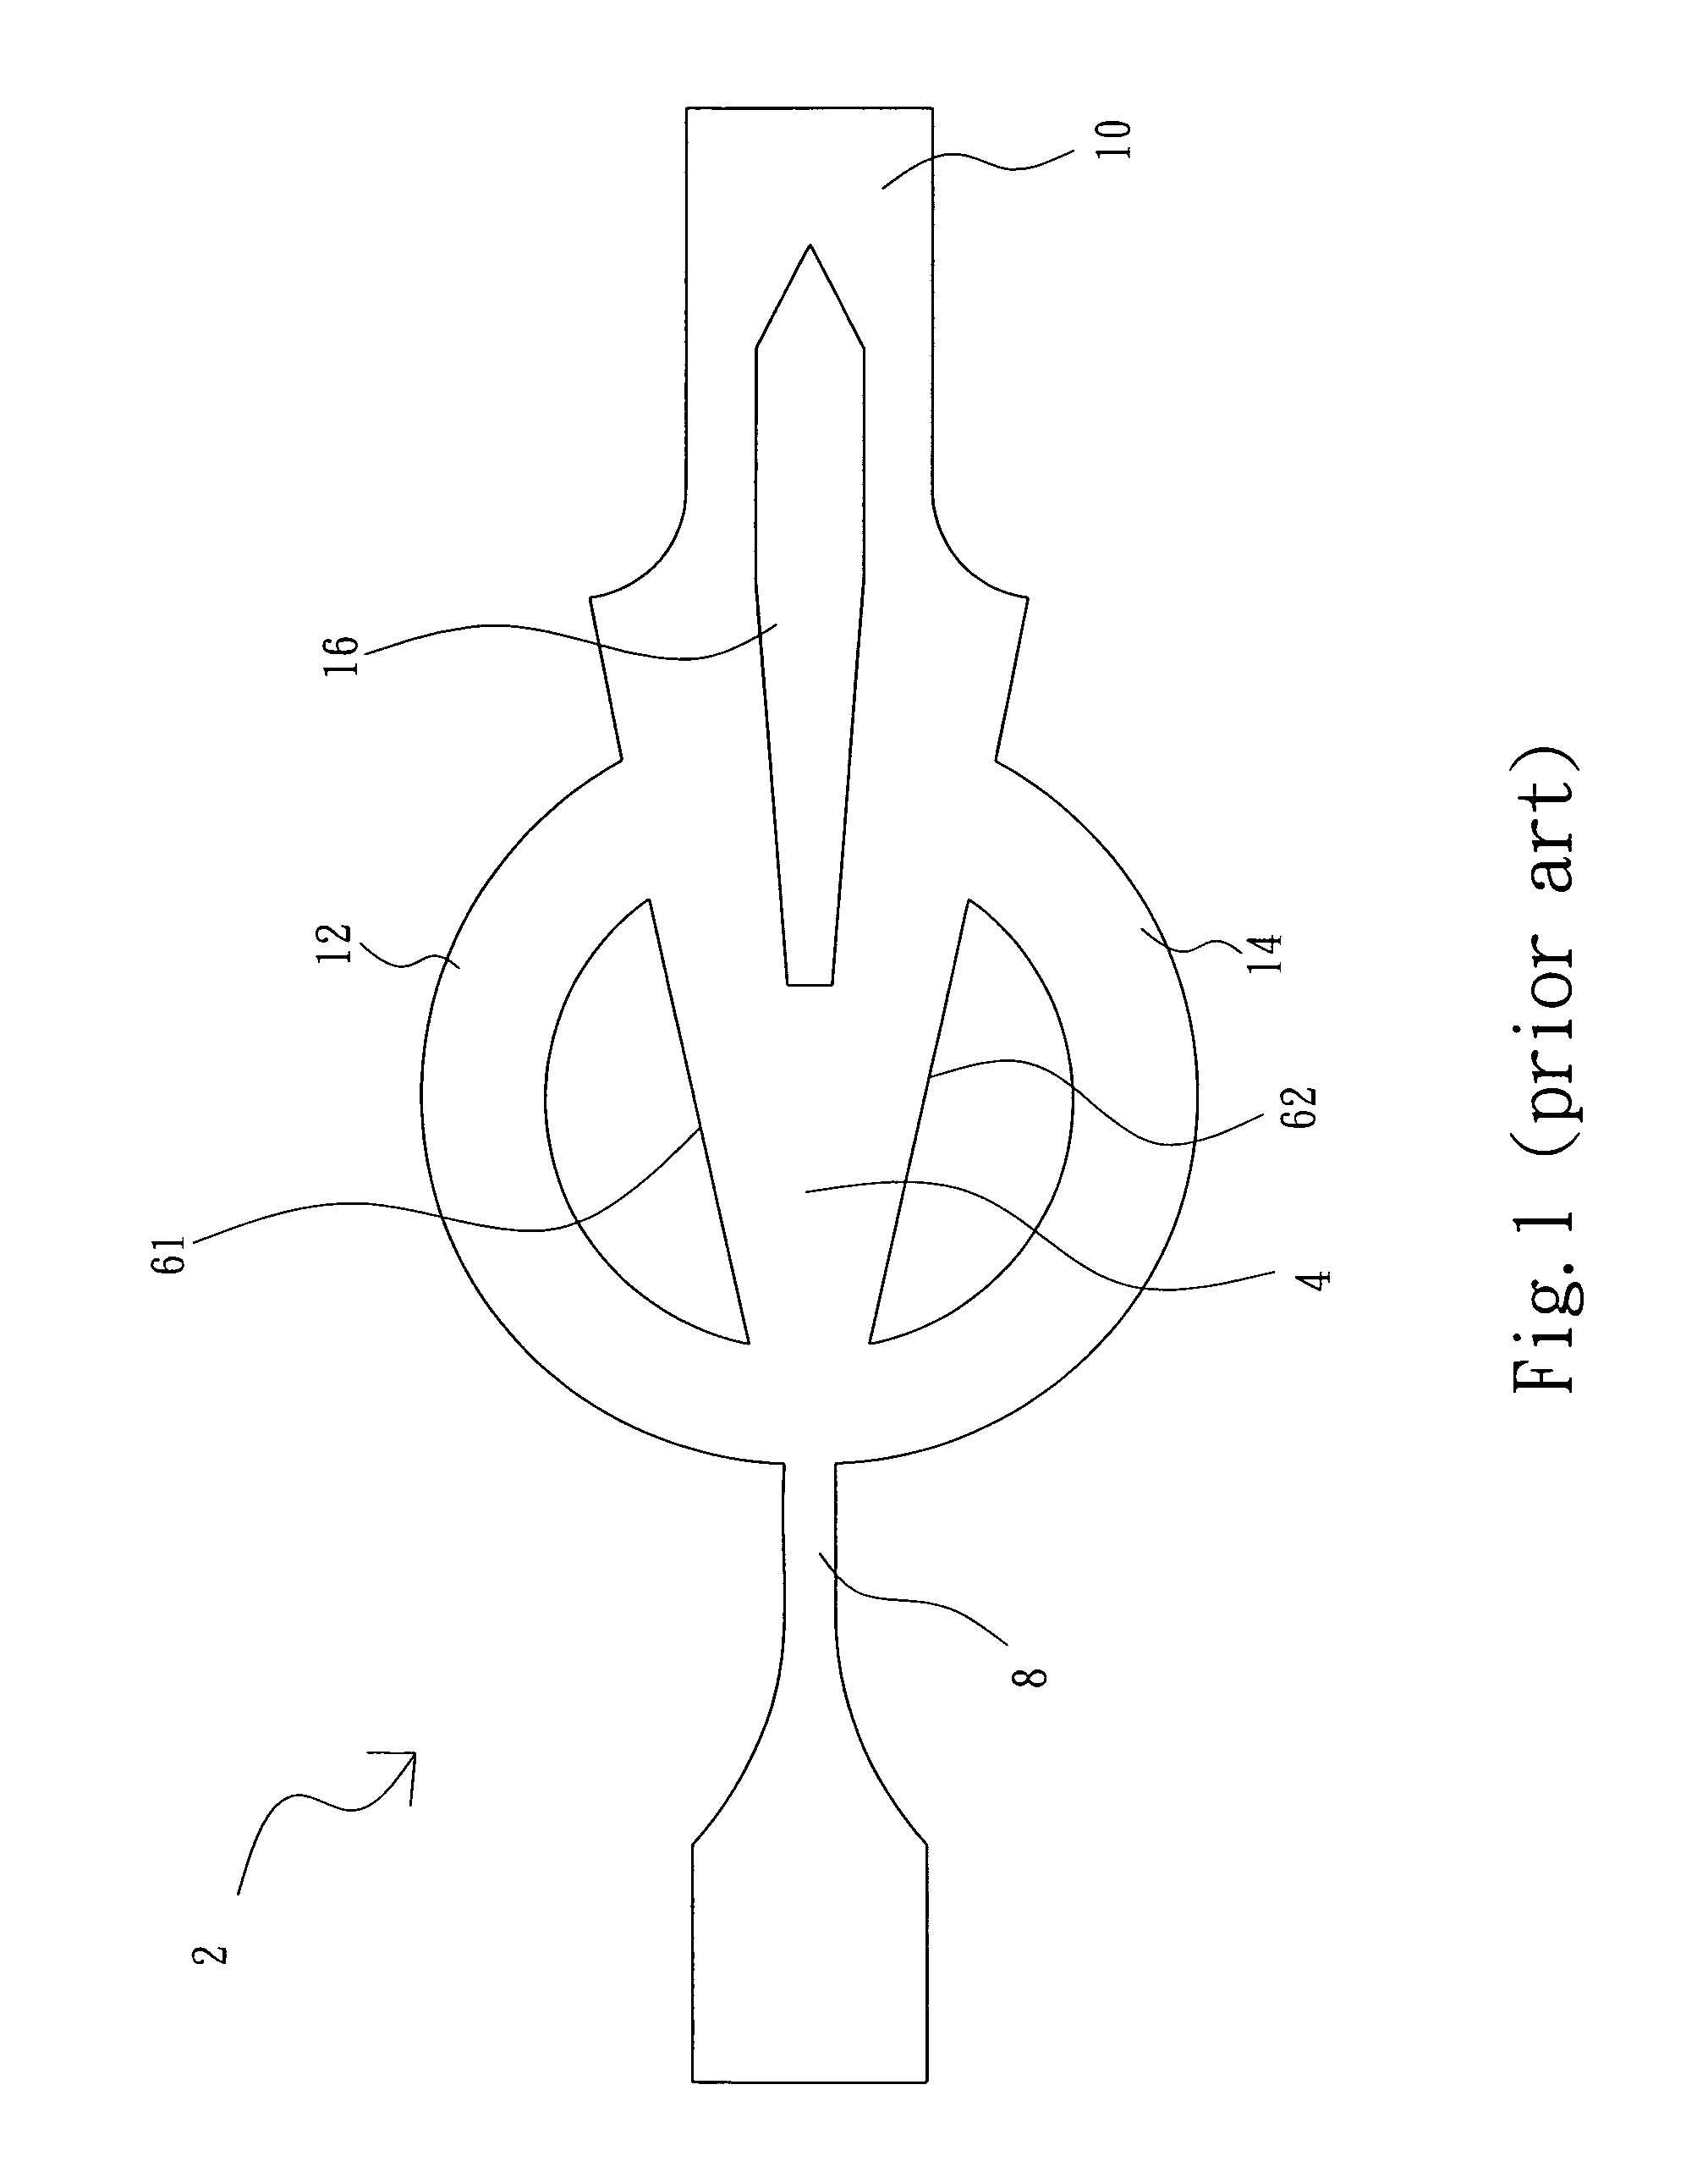 Micro-fluidic oscillator having a sudden expansion region at the nozzle outlet